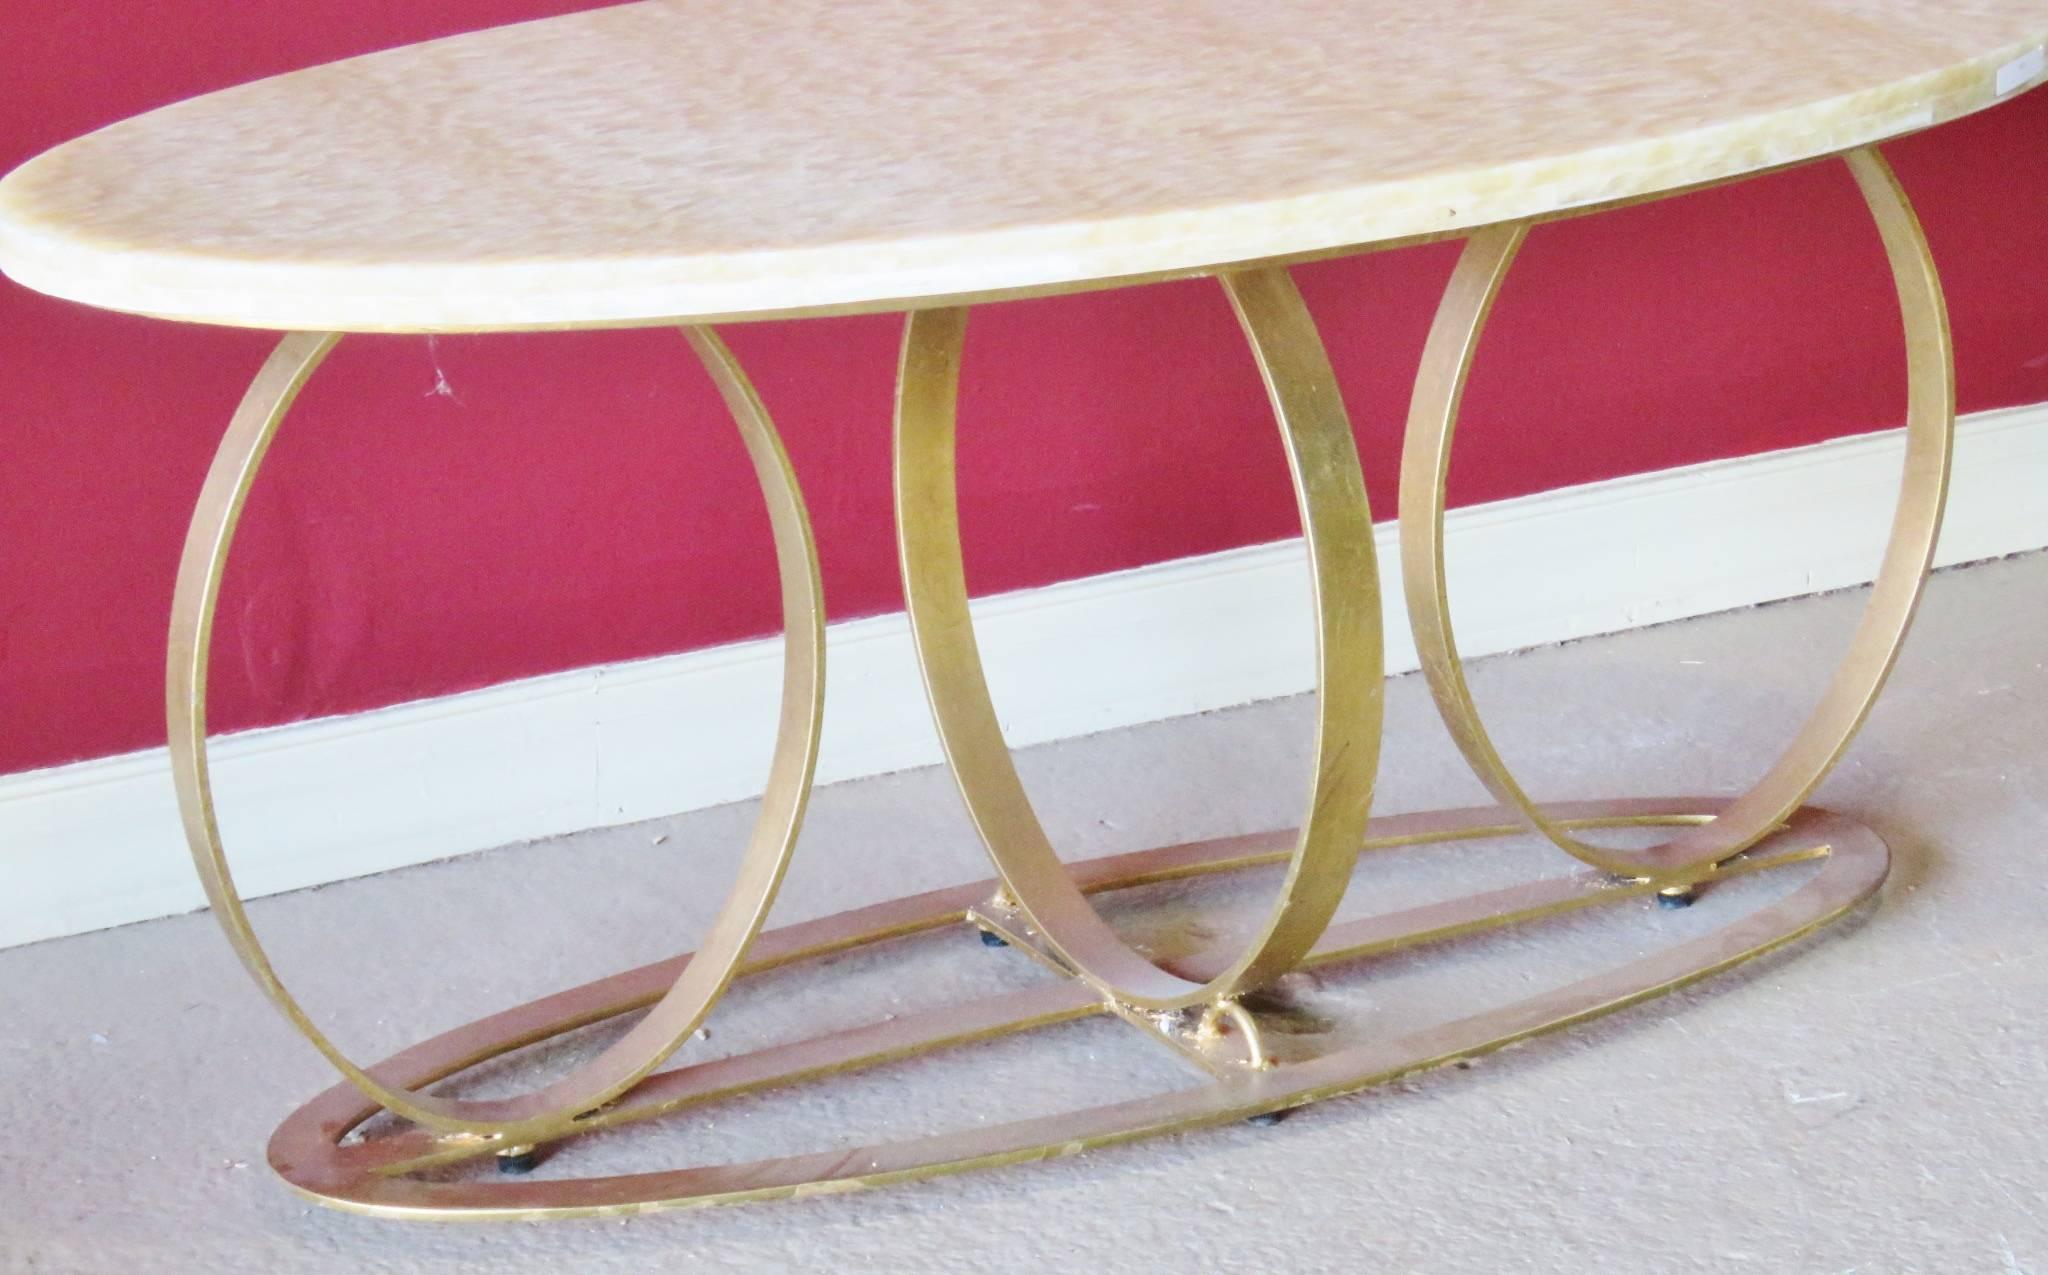 20th Century Modern Design Gilt Painted Marble-Top Coffee Table